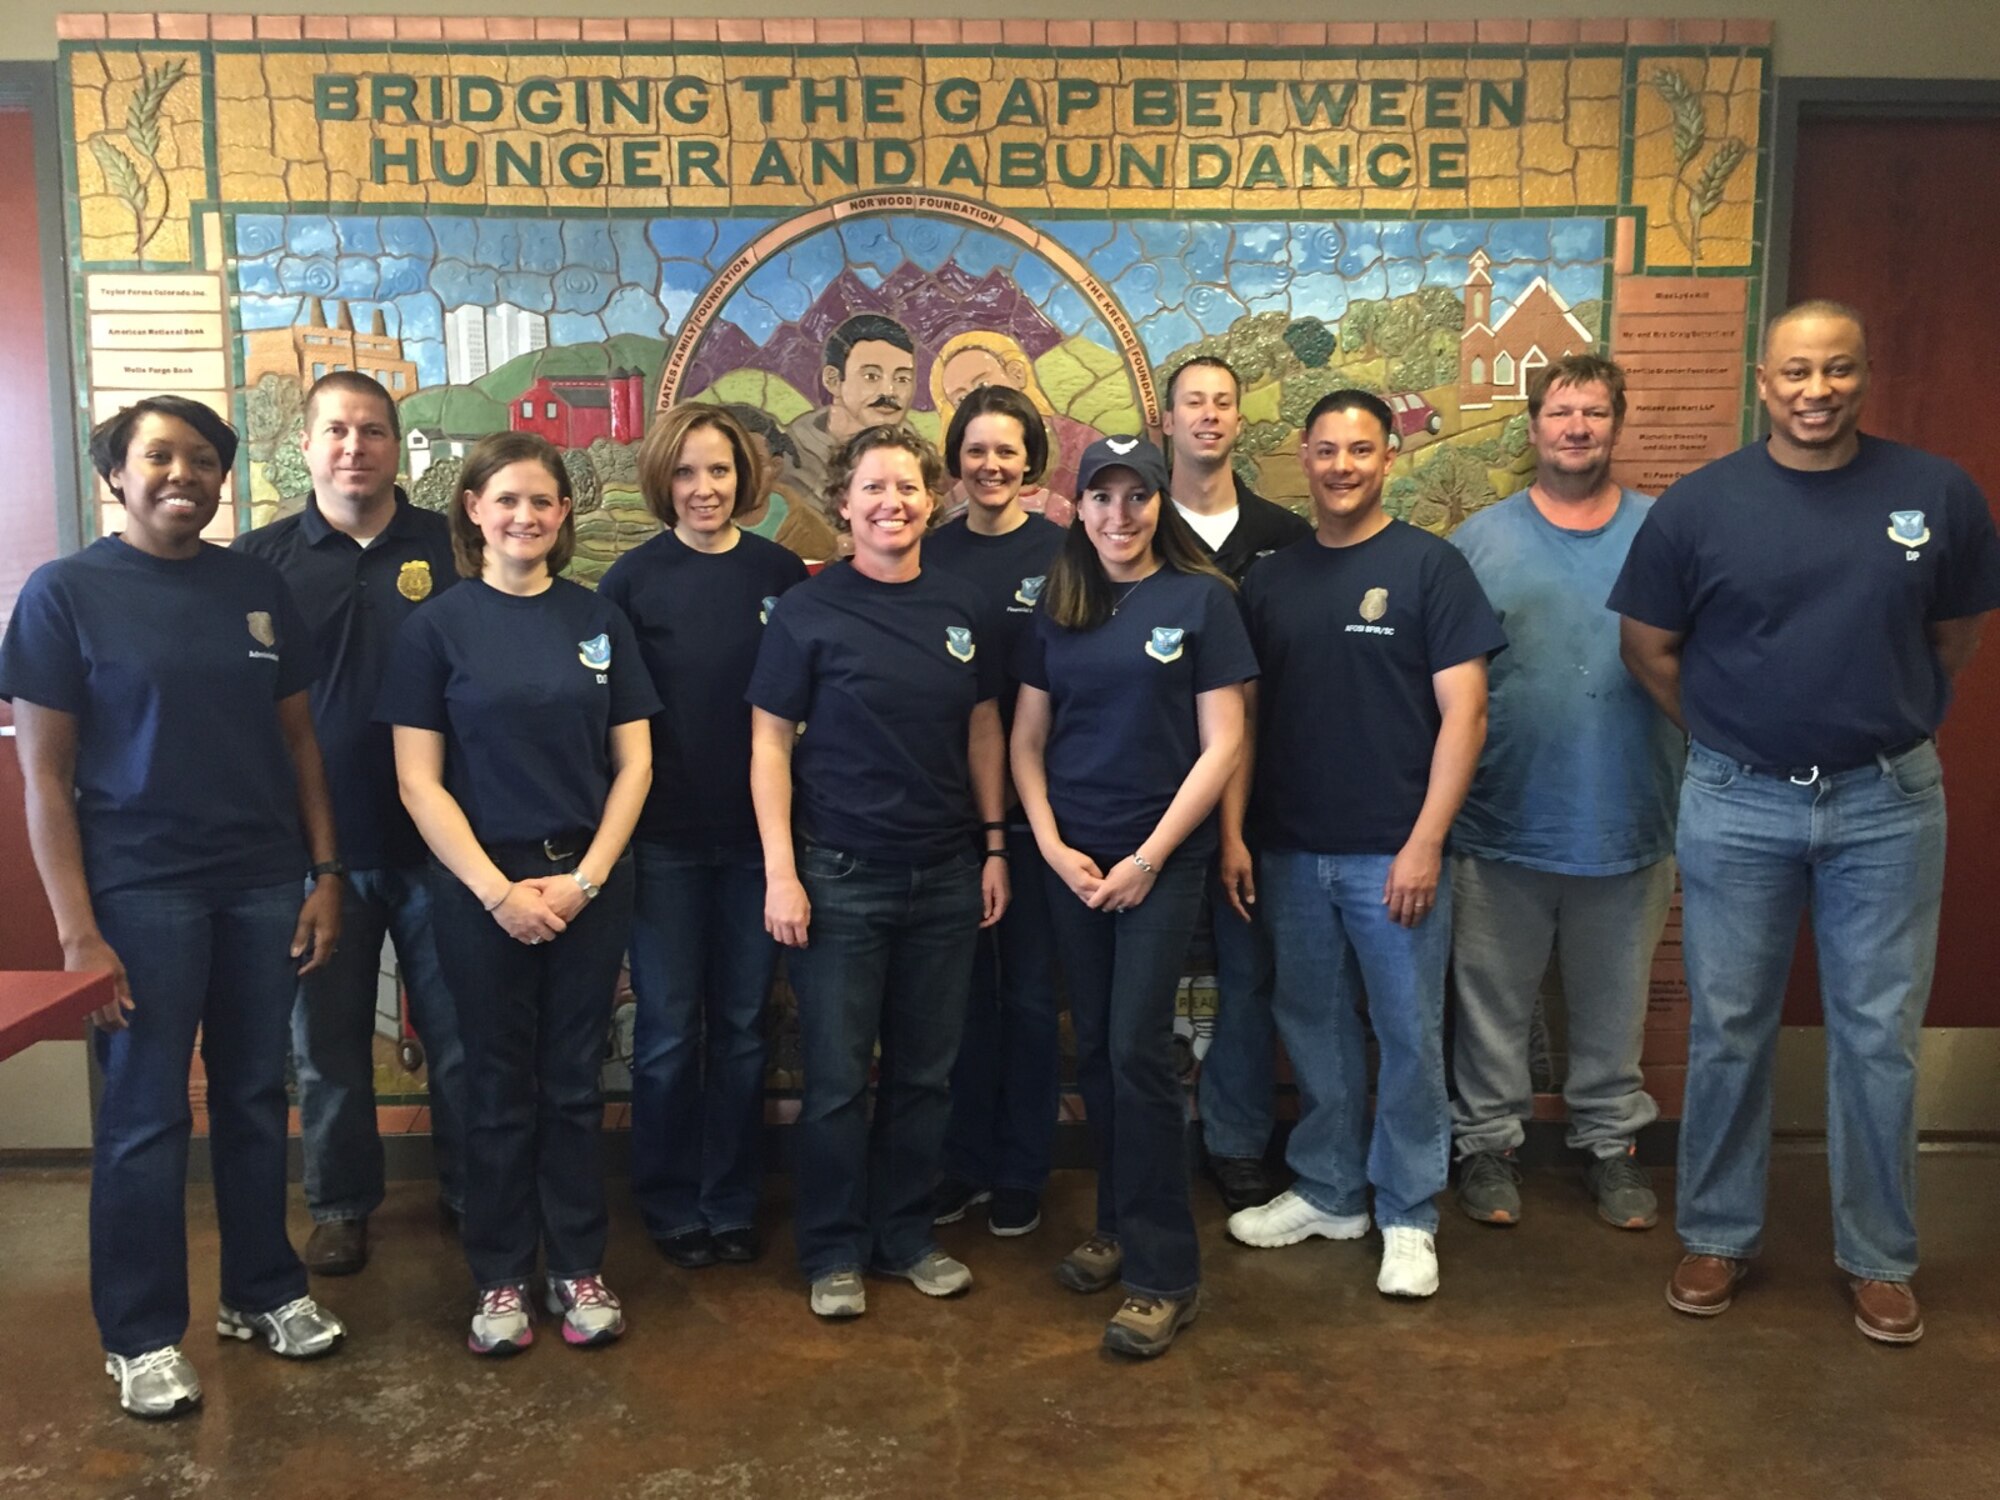 AFOSI’s Region 8 personnel volunteered, May 15, 2015, at a food bank in Colorado Springs, Colo., as part of the U.S. Postal Service Care and Share food drive. Region 8 members sorted food that was recently collected.